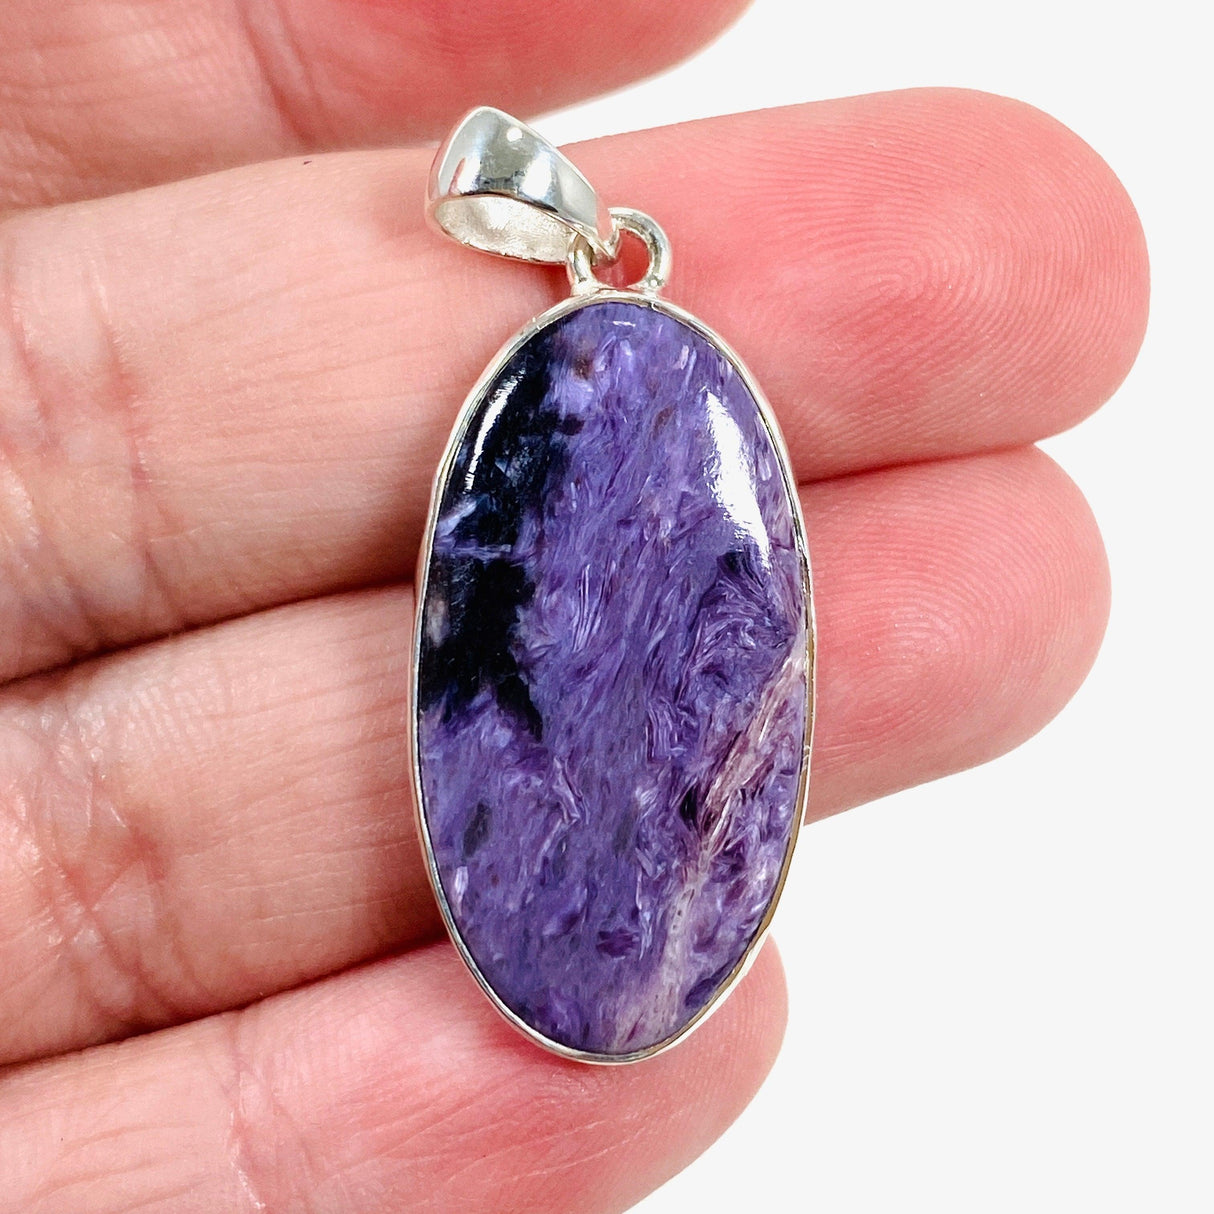 Purple Charoite oval pendant in sterling silver sitting on a hand